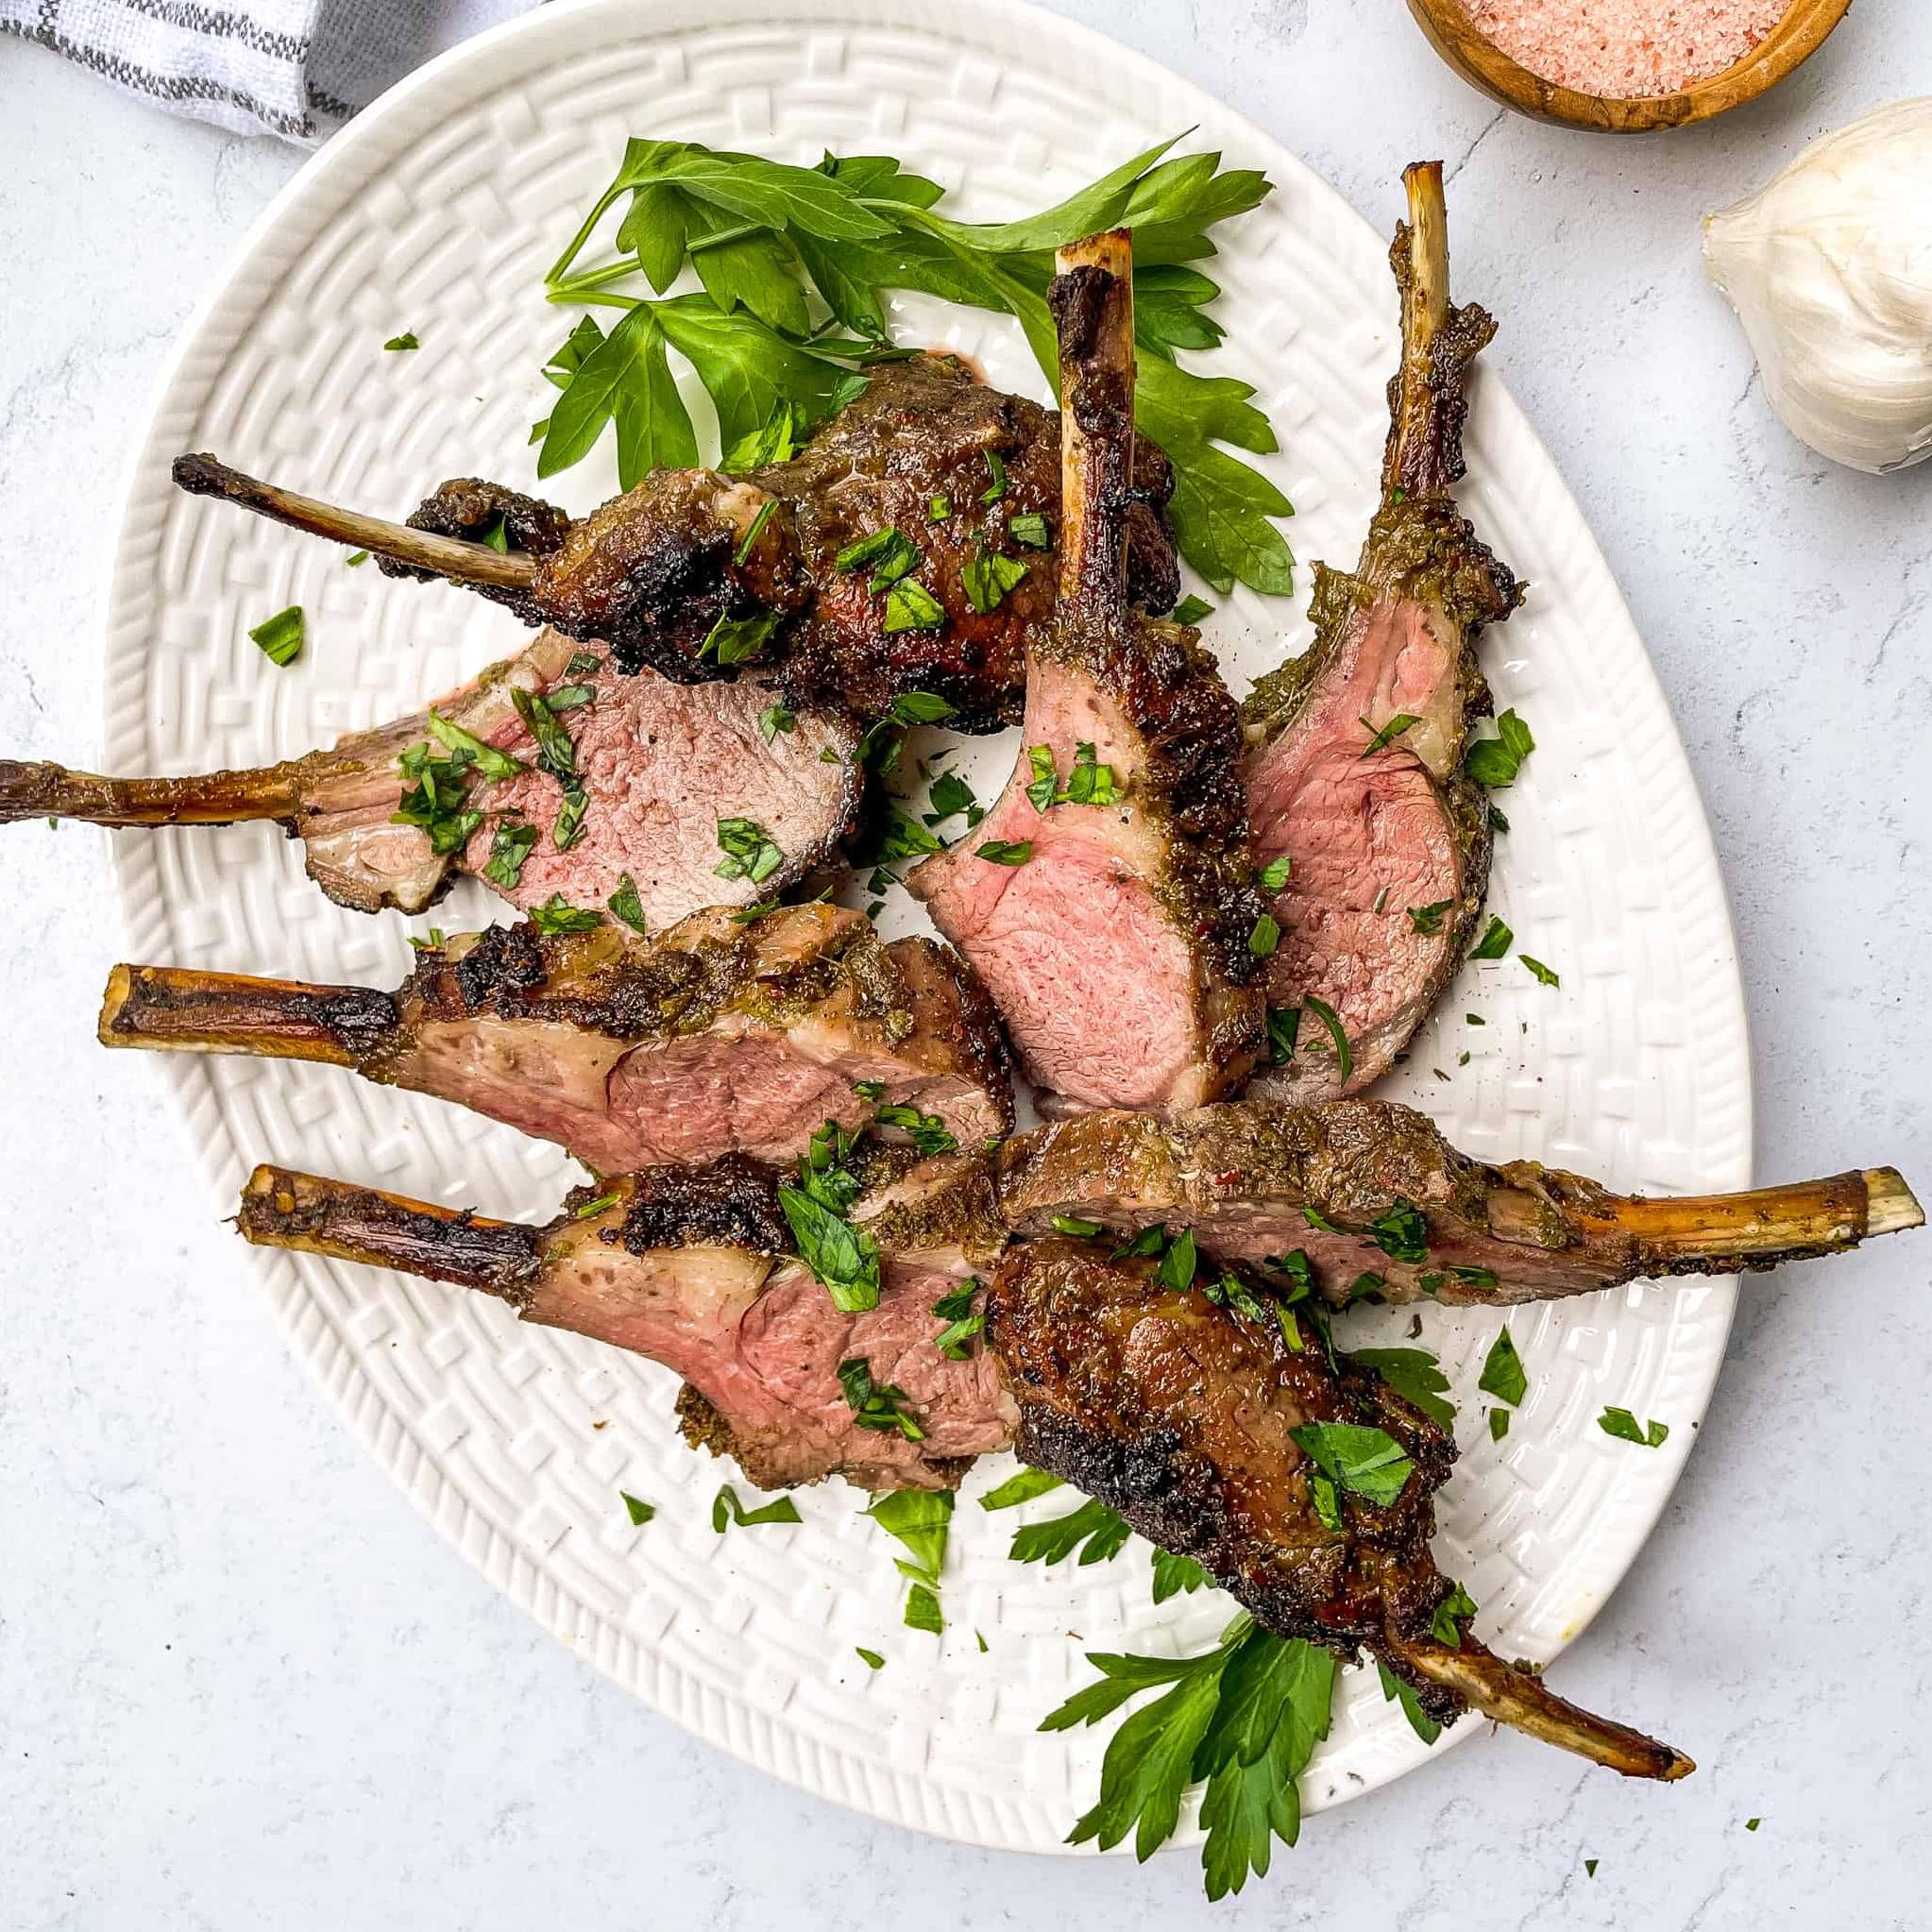  Quick and easy to prepare, these lamb chops are perfect for a weeknight dinner!